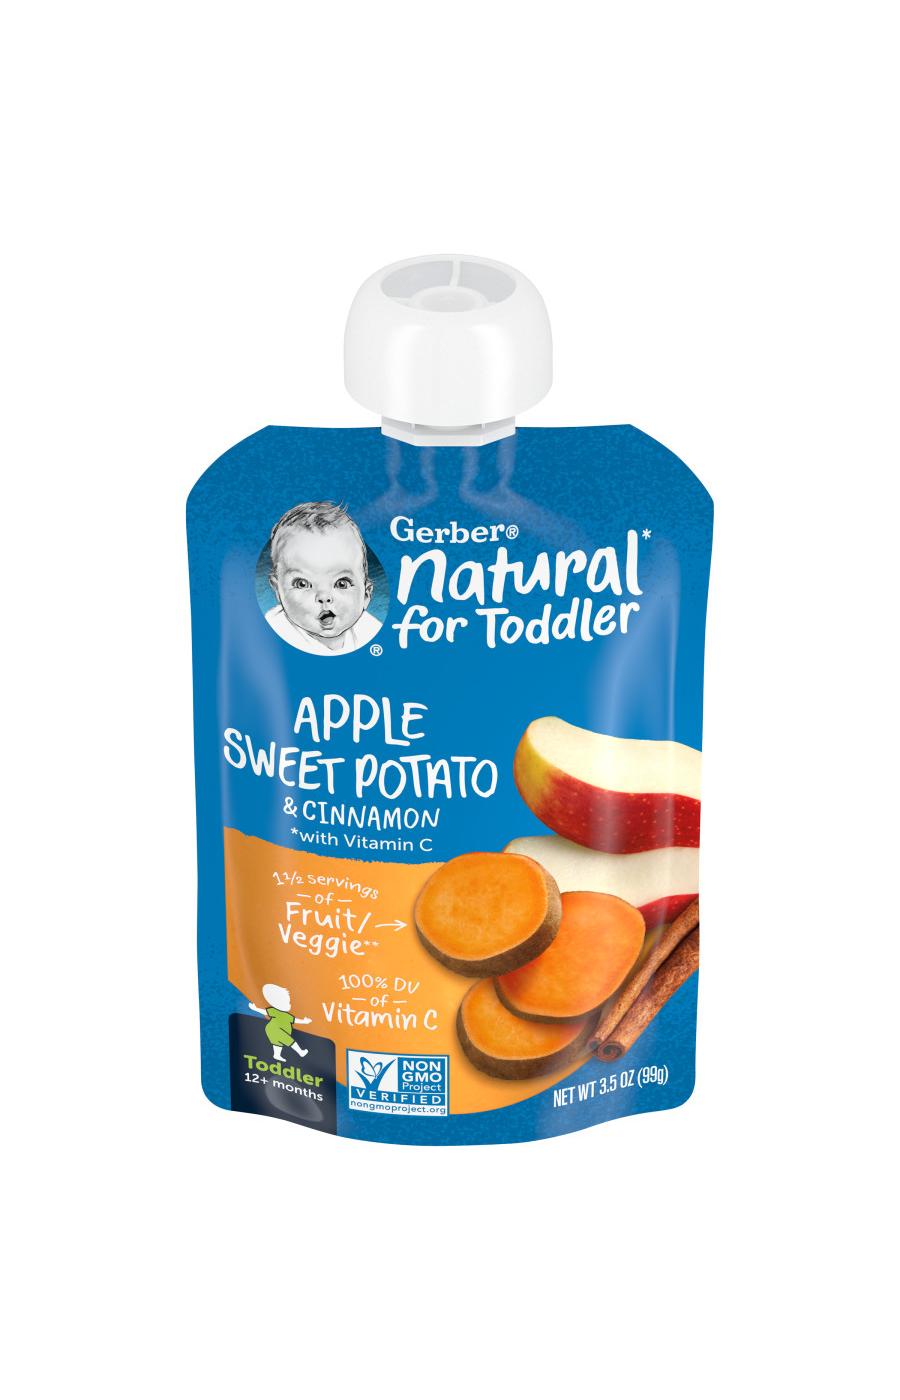 Gerber Natural for Toddler Pouch - Apple Sweet Potato & Cinnamon; image 1 of 8